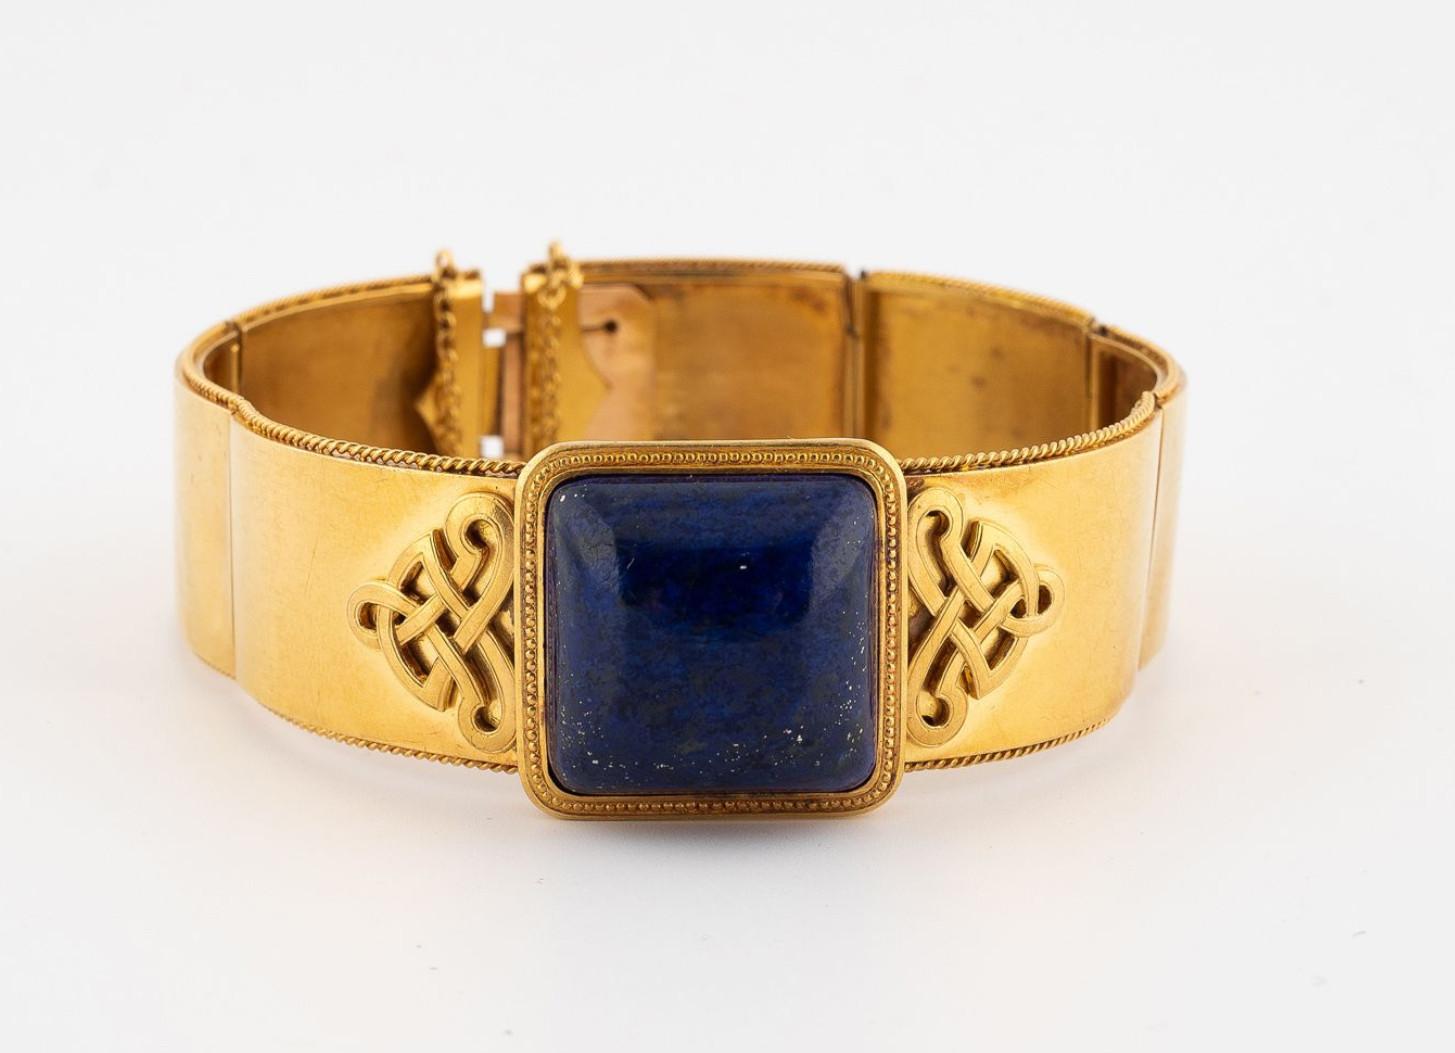 Articulated ribbon bracelet in 18kt yellow gold centered with a large cabochon of lapis lazuli supported by two chiseled applied scrolls.
Diameter 6 cm
Circa 1870's
Gross weight: 35.5g.